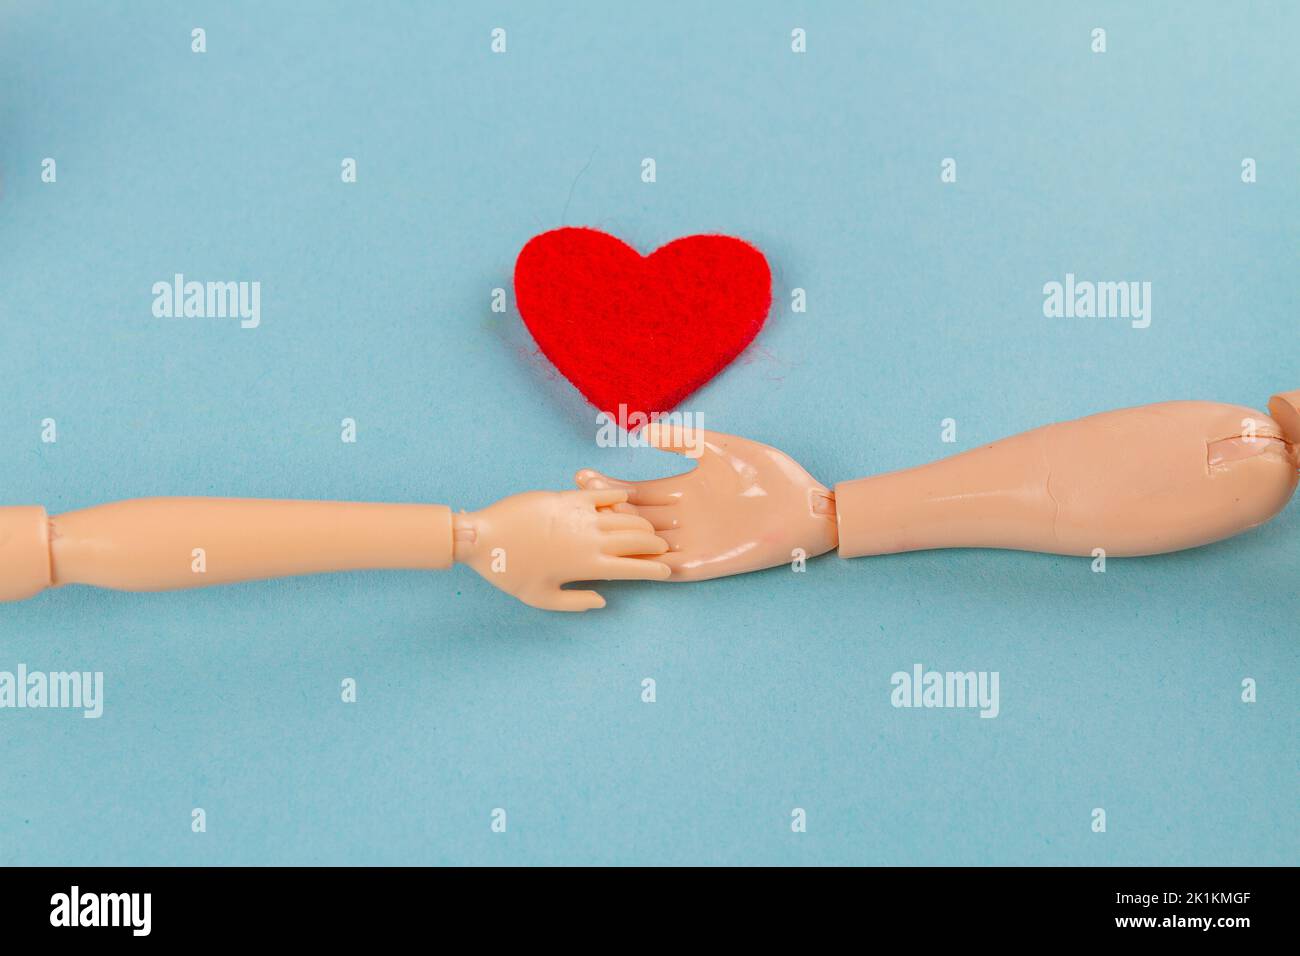 Doll hands holding and red heart on blue background. Love or charity concept. Stock Photo